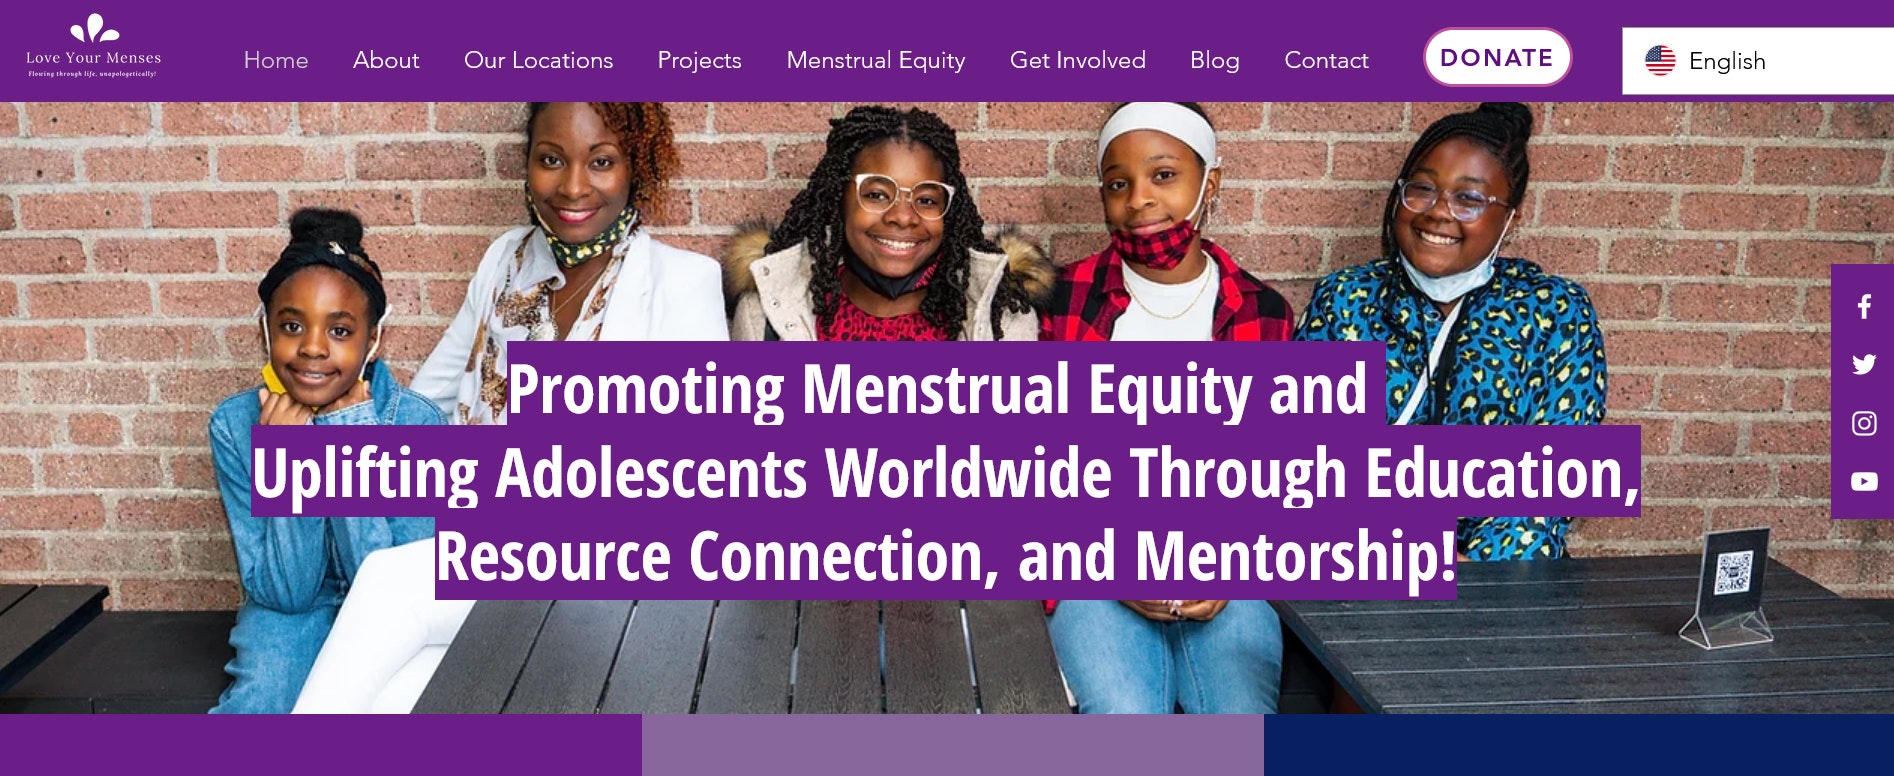 The homepage for loveyourmenses.com. The photo shows four smiling Black tweens with an adult woman under copy that says, "Promoting Menstrual Equity and  Uplifting Adolescents Worldwide Through Education, Resource Connection, and Mentorship!"Home Love Your Menses Homepage Screenshot